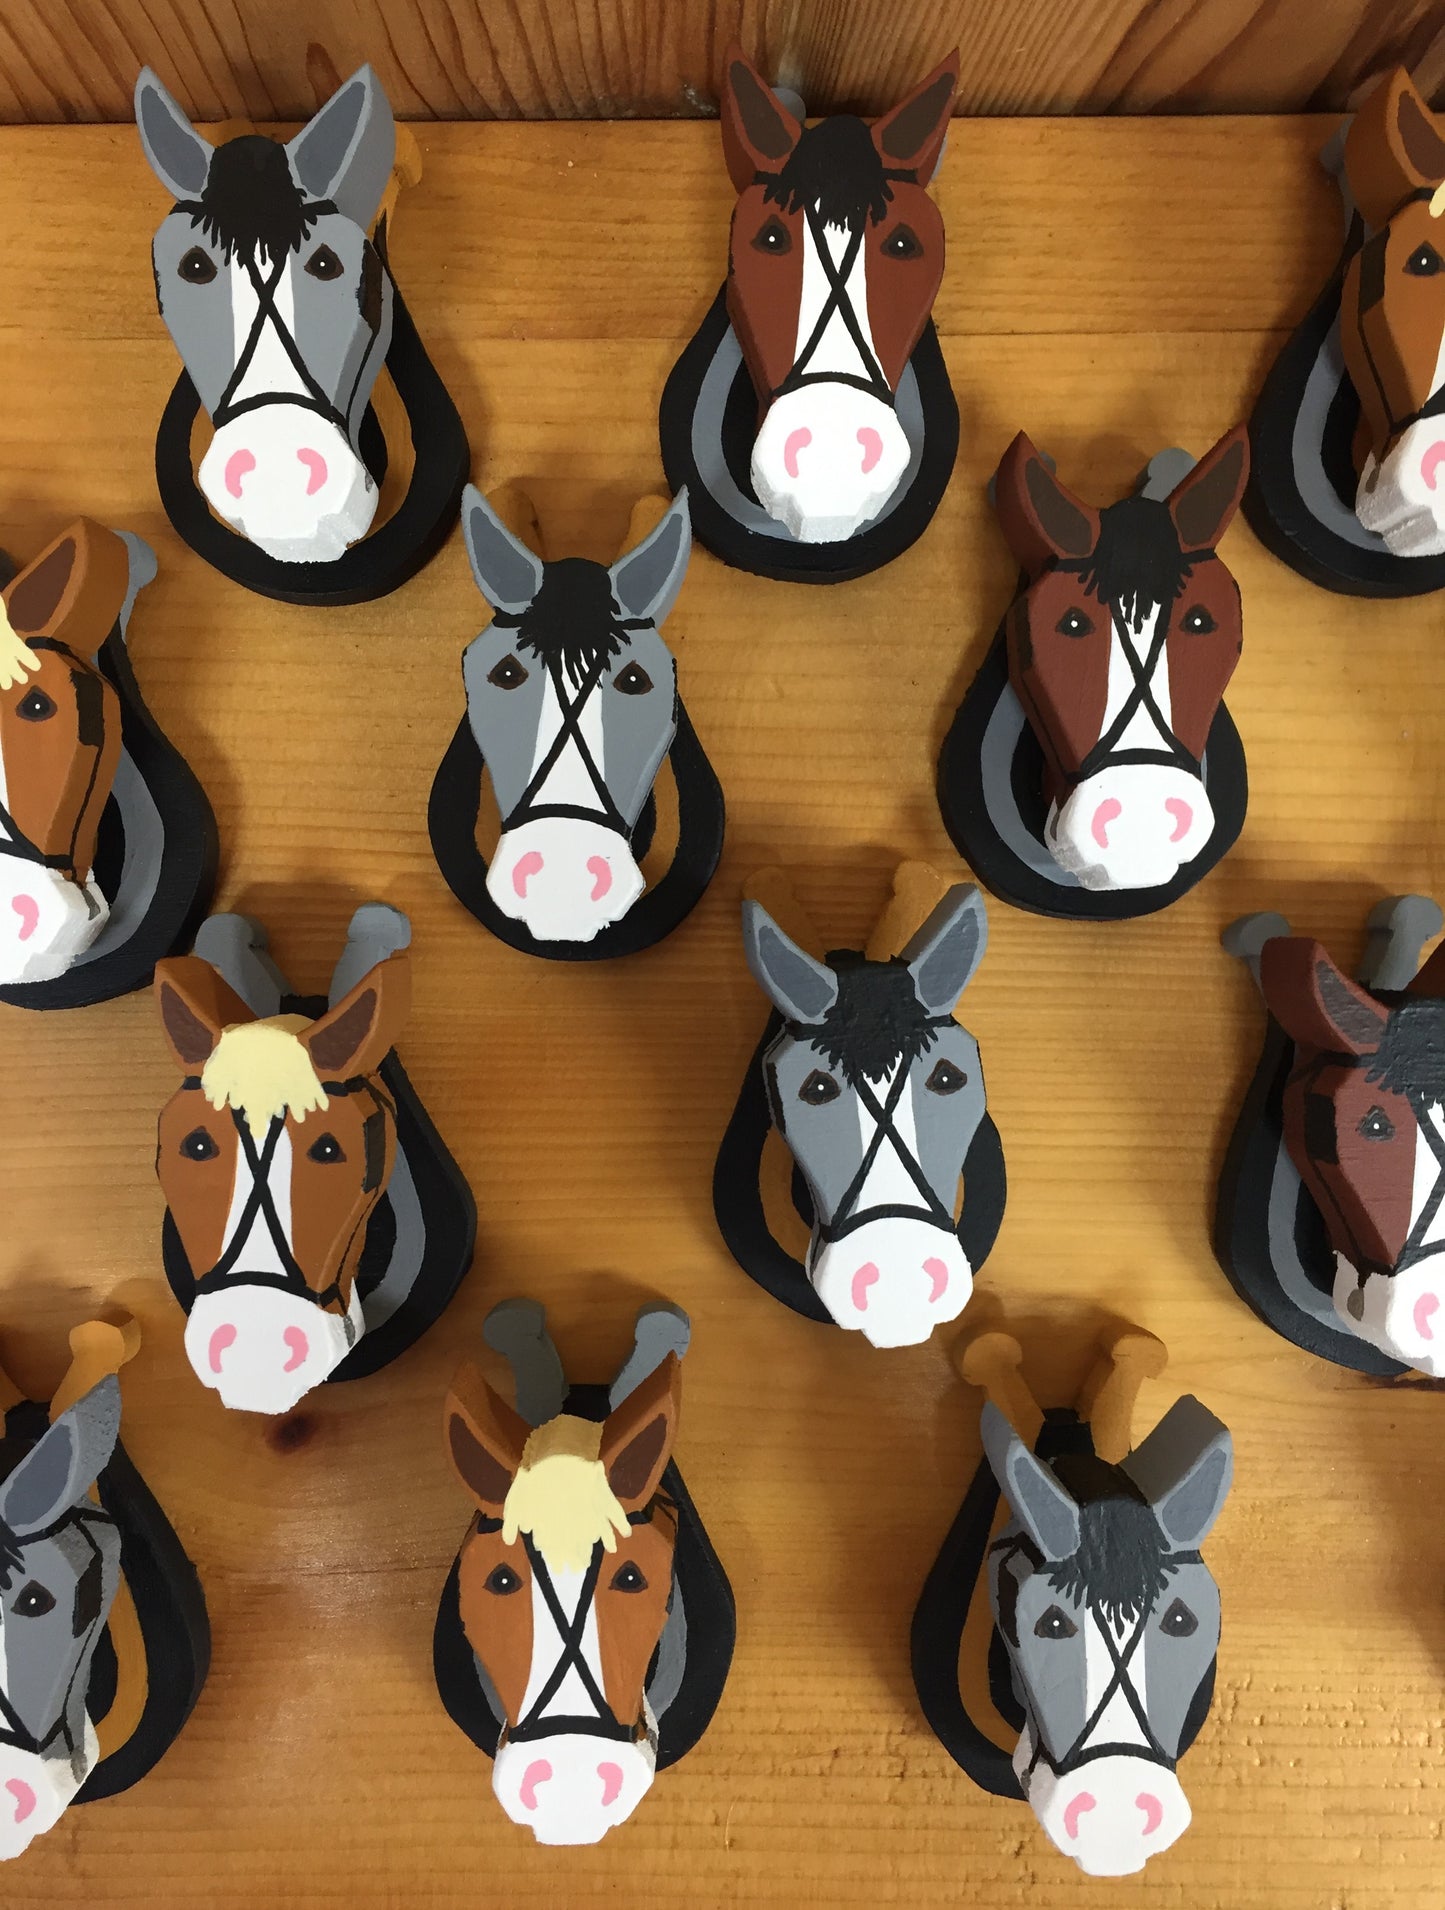 Handcrafted wood horse refrigerator magnets at Triple Mountain